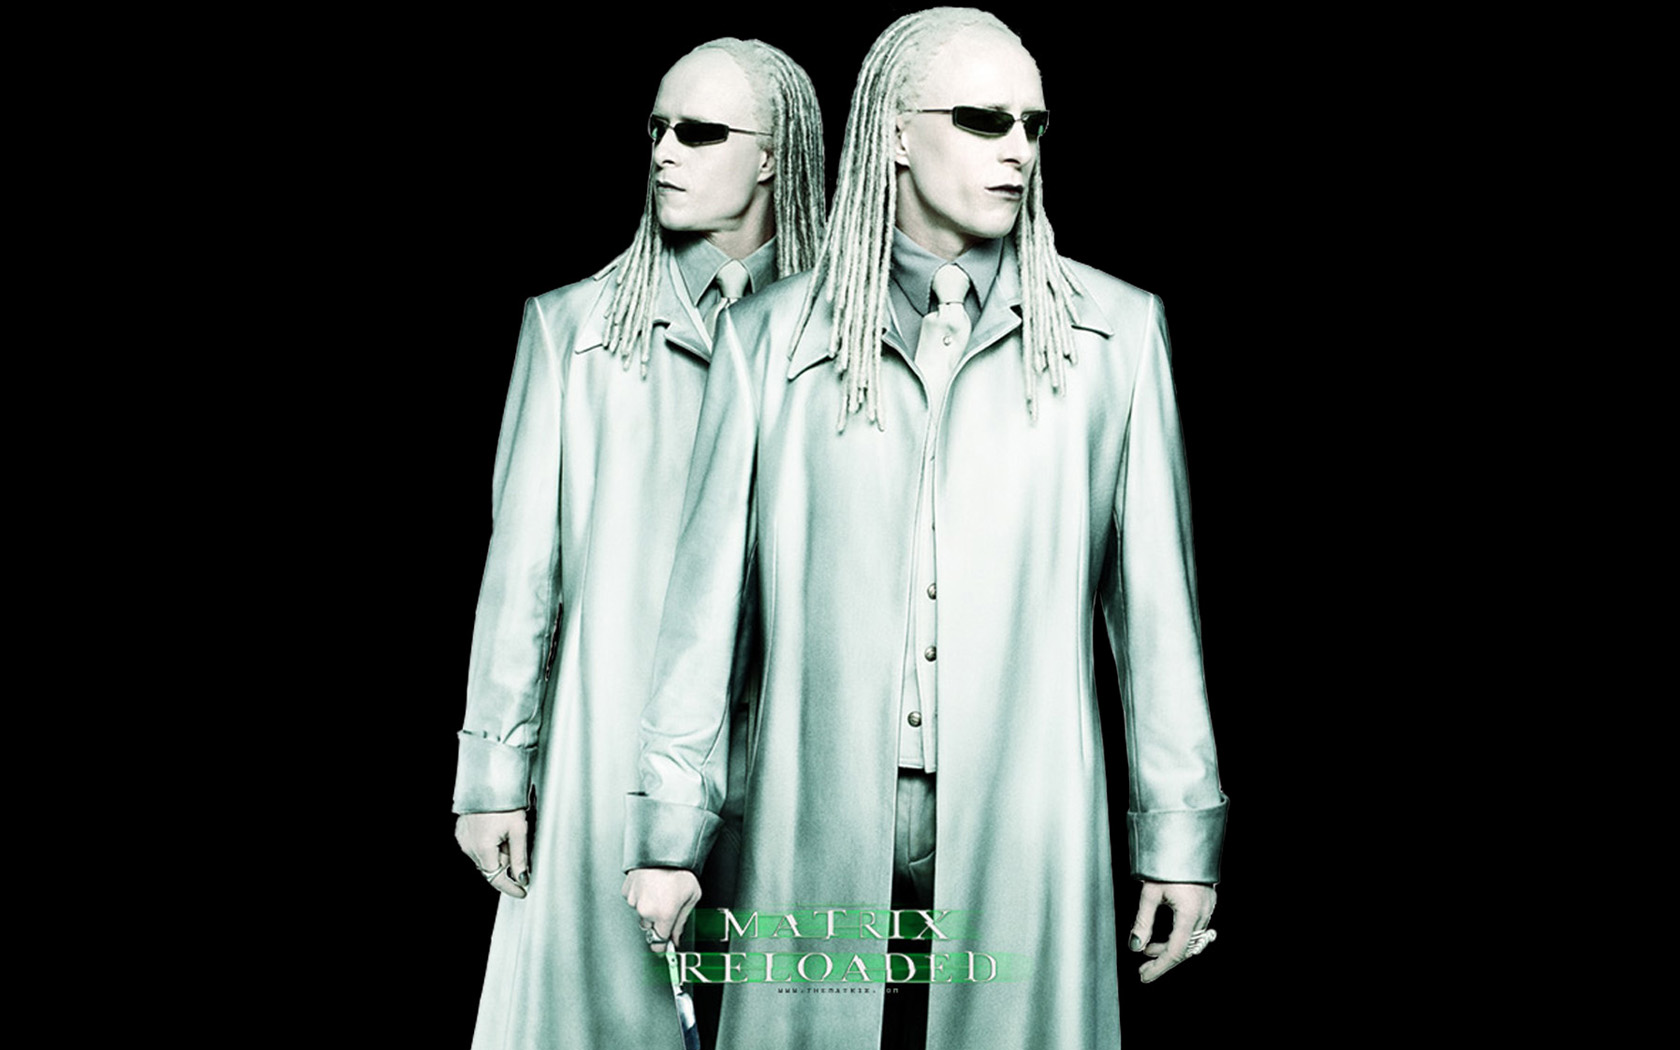 People 1680x1050 The Matrix Reloaded twins black background movies men pale dreadlocks white hair white clothing sunglasses